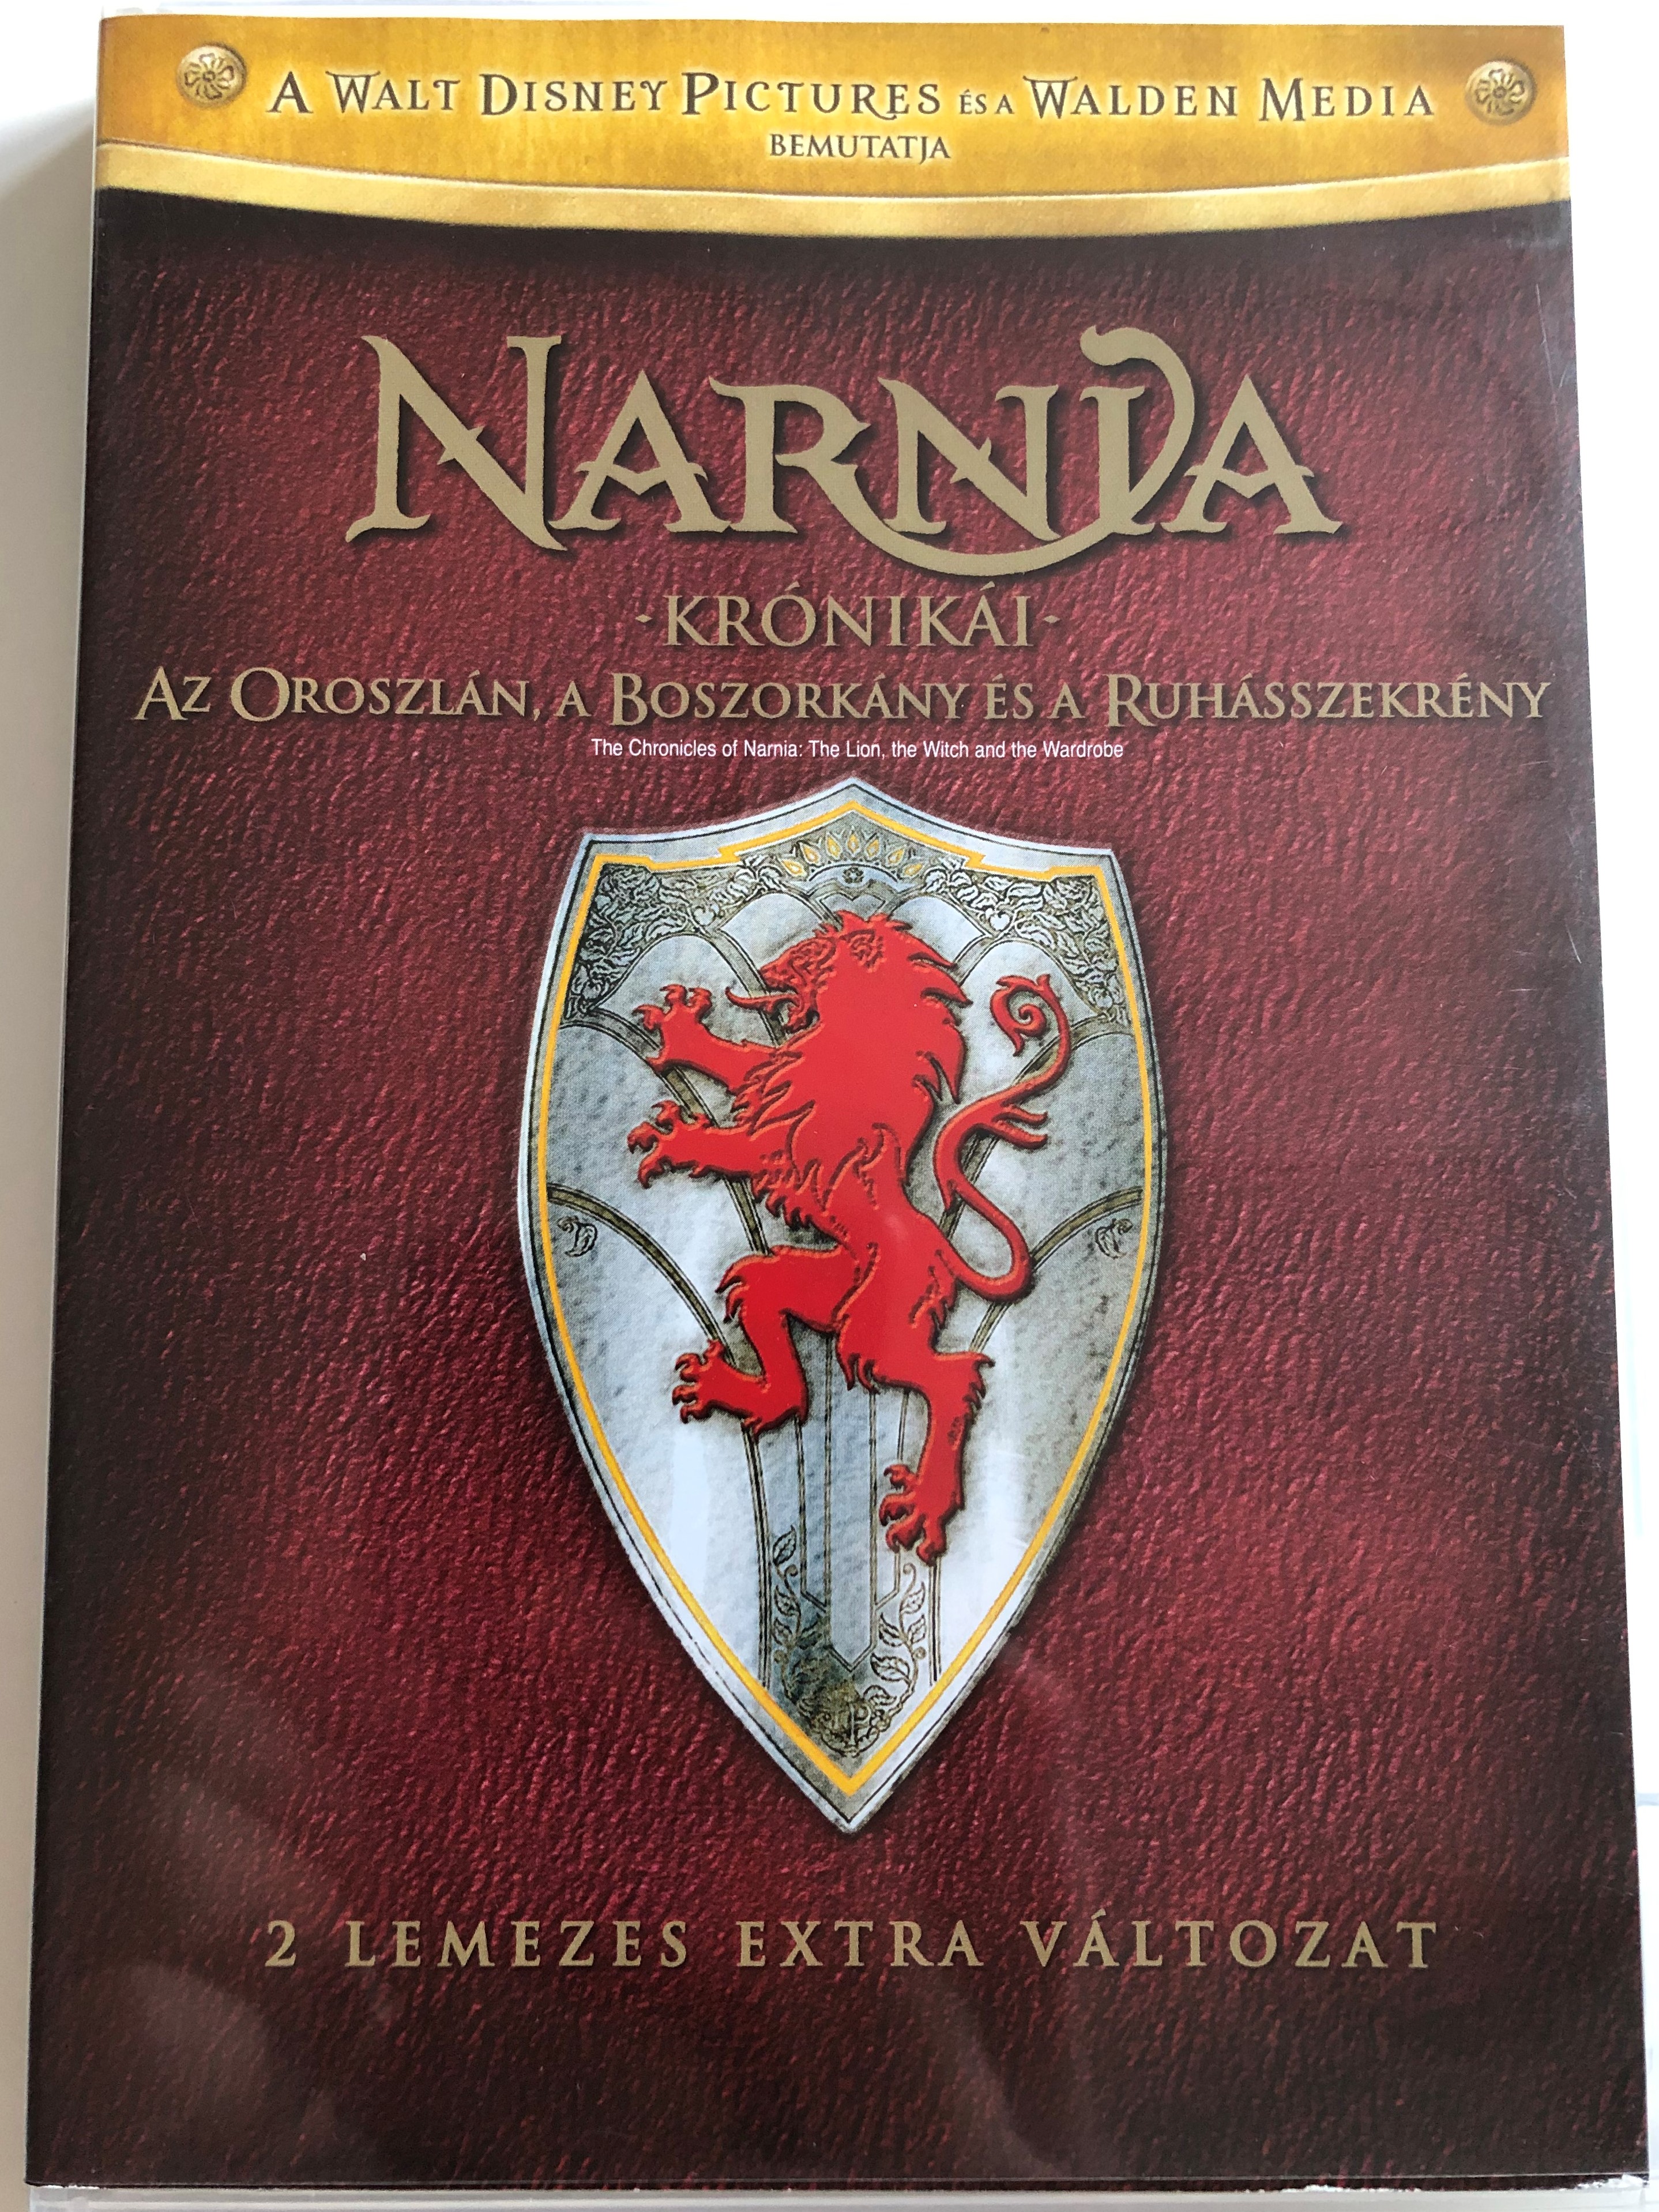 the-chronicles-of-narnia-the-lion-the-witch-and-the-wardrobe-2x-dvd-extra-edition-1.jpg